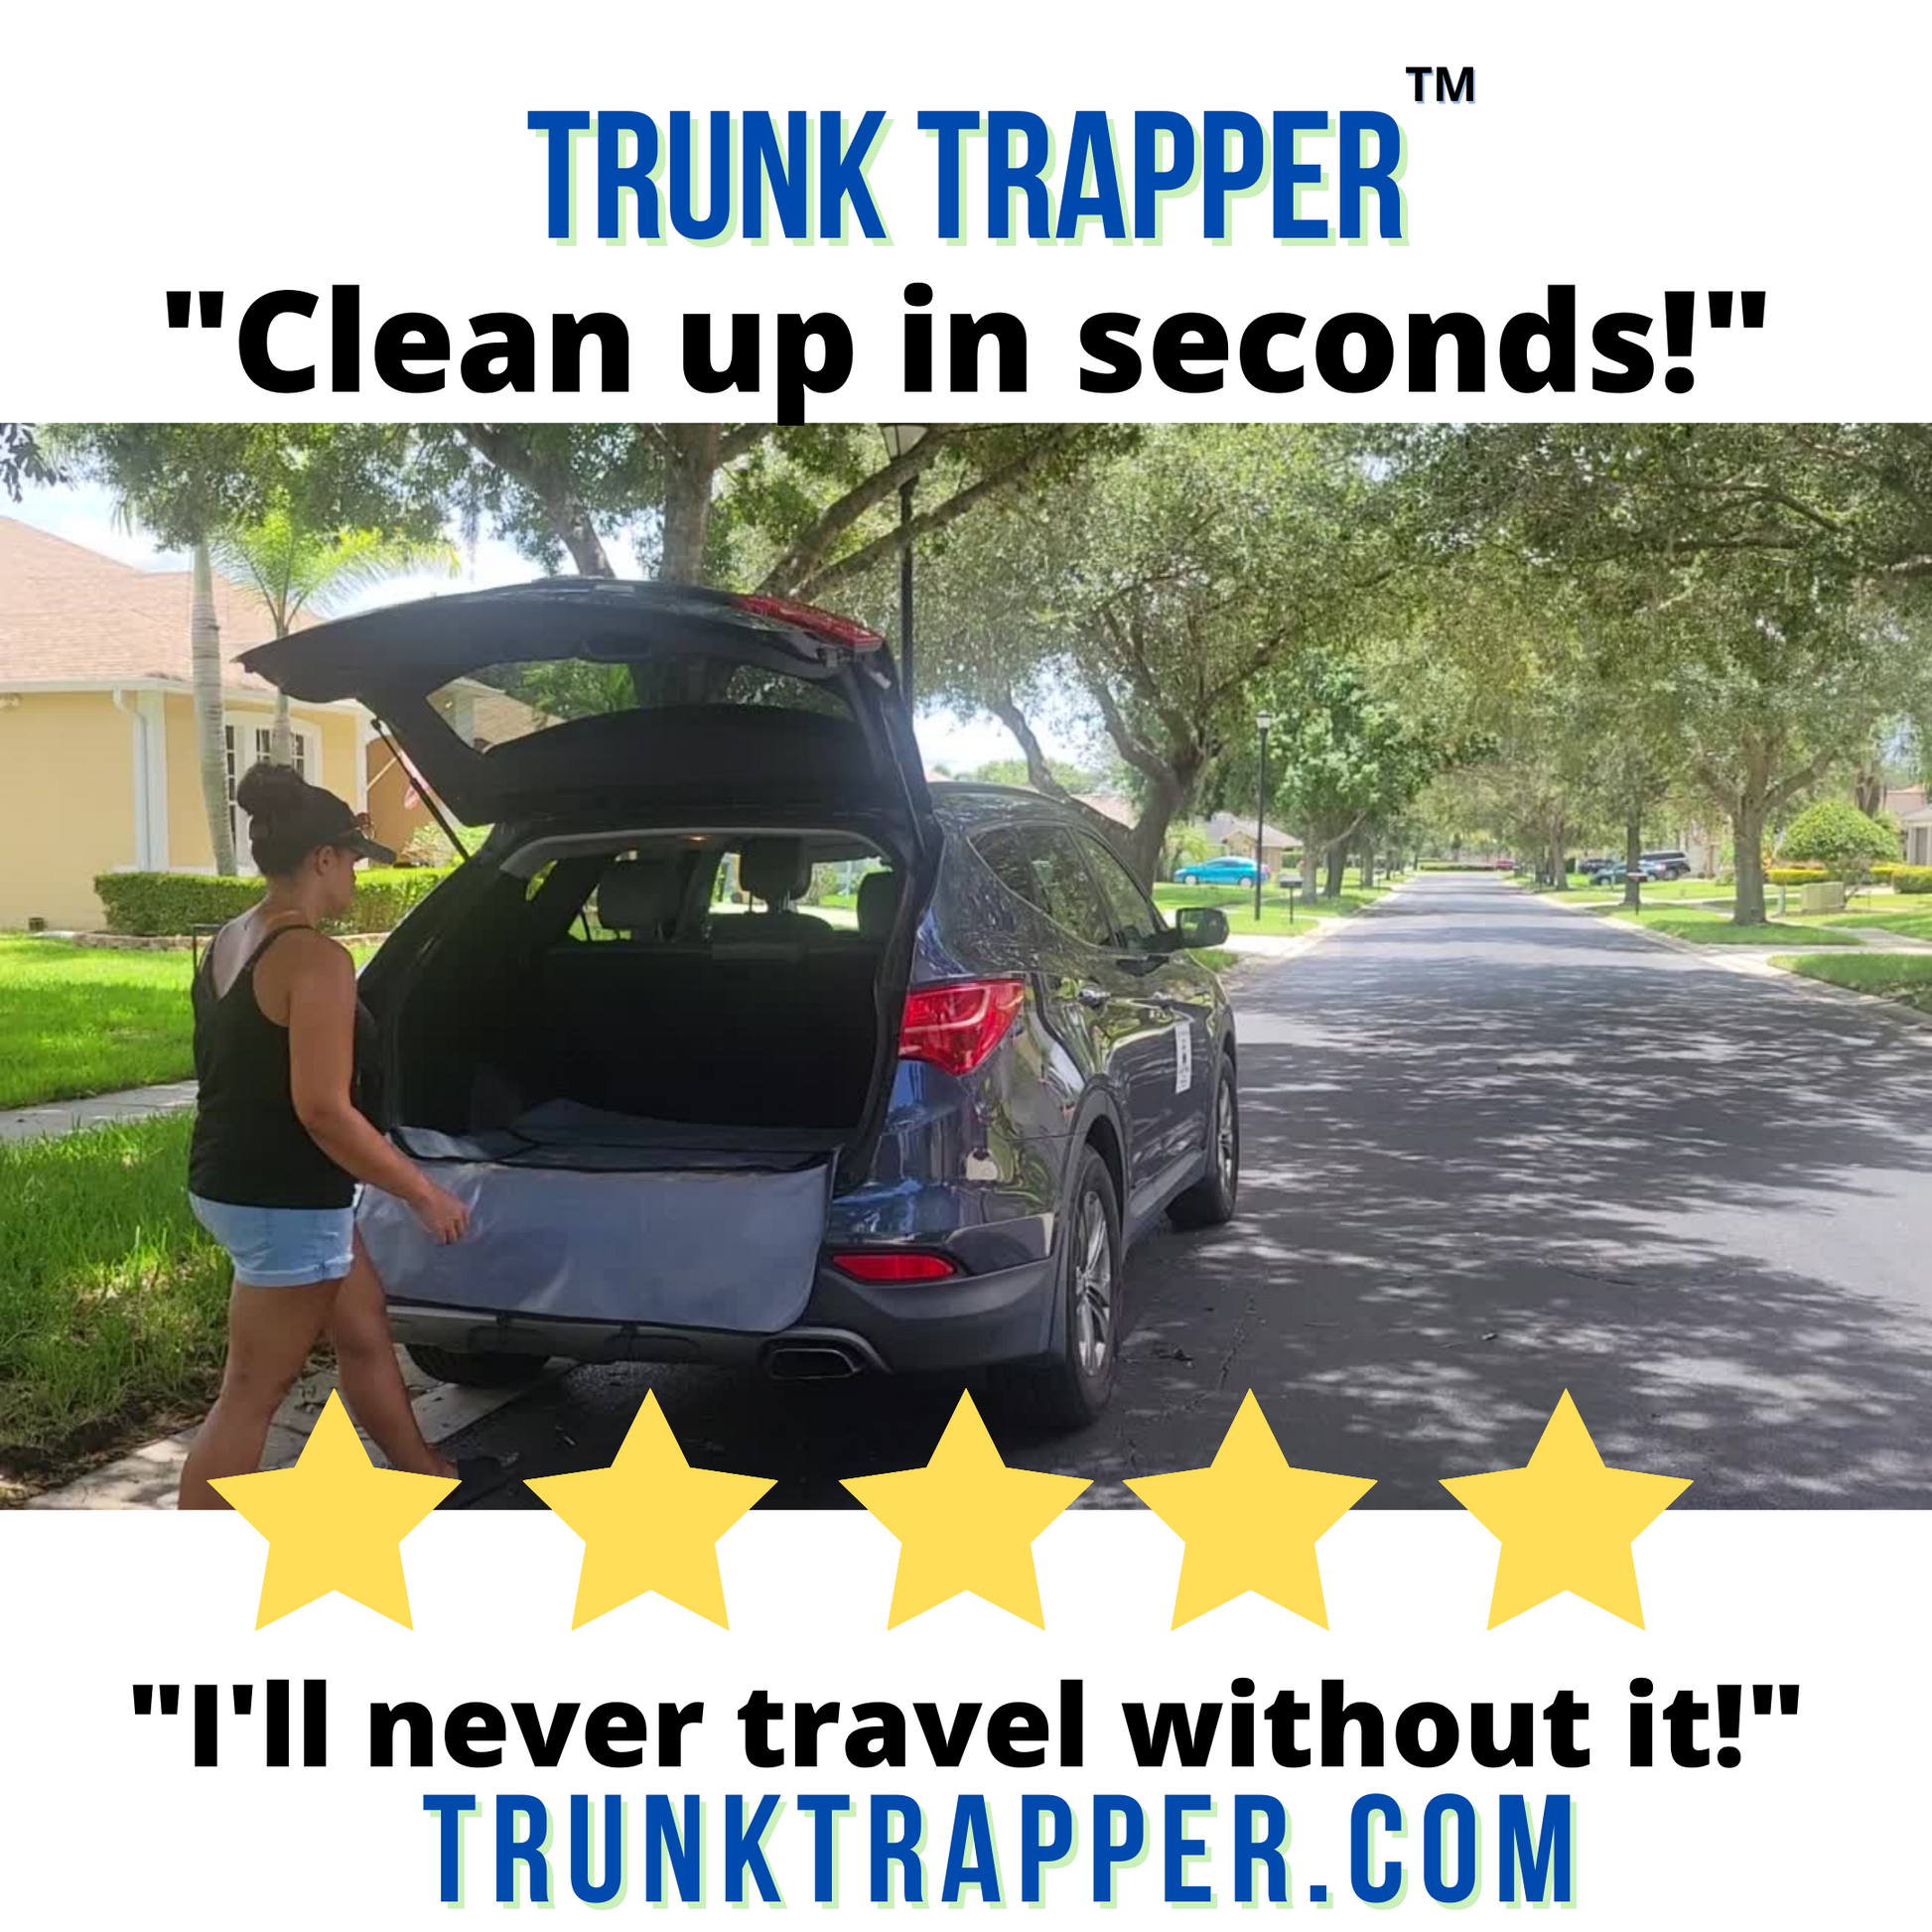 Trunk Trapper Never Travel Without it